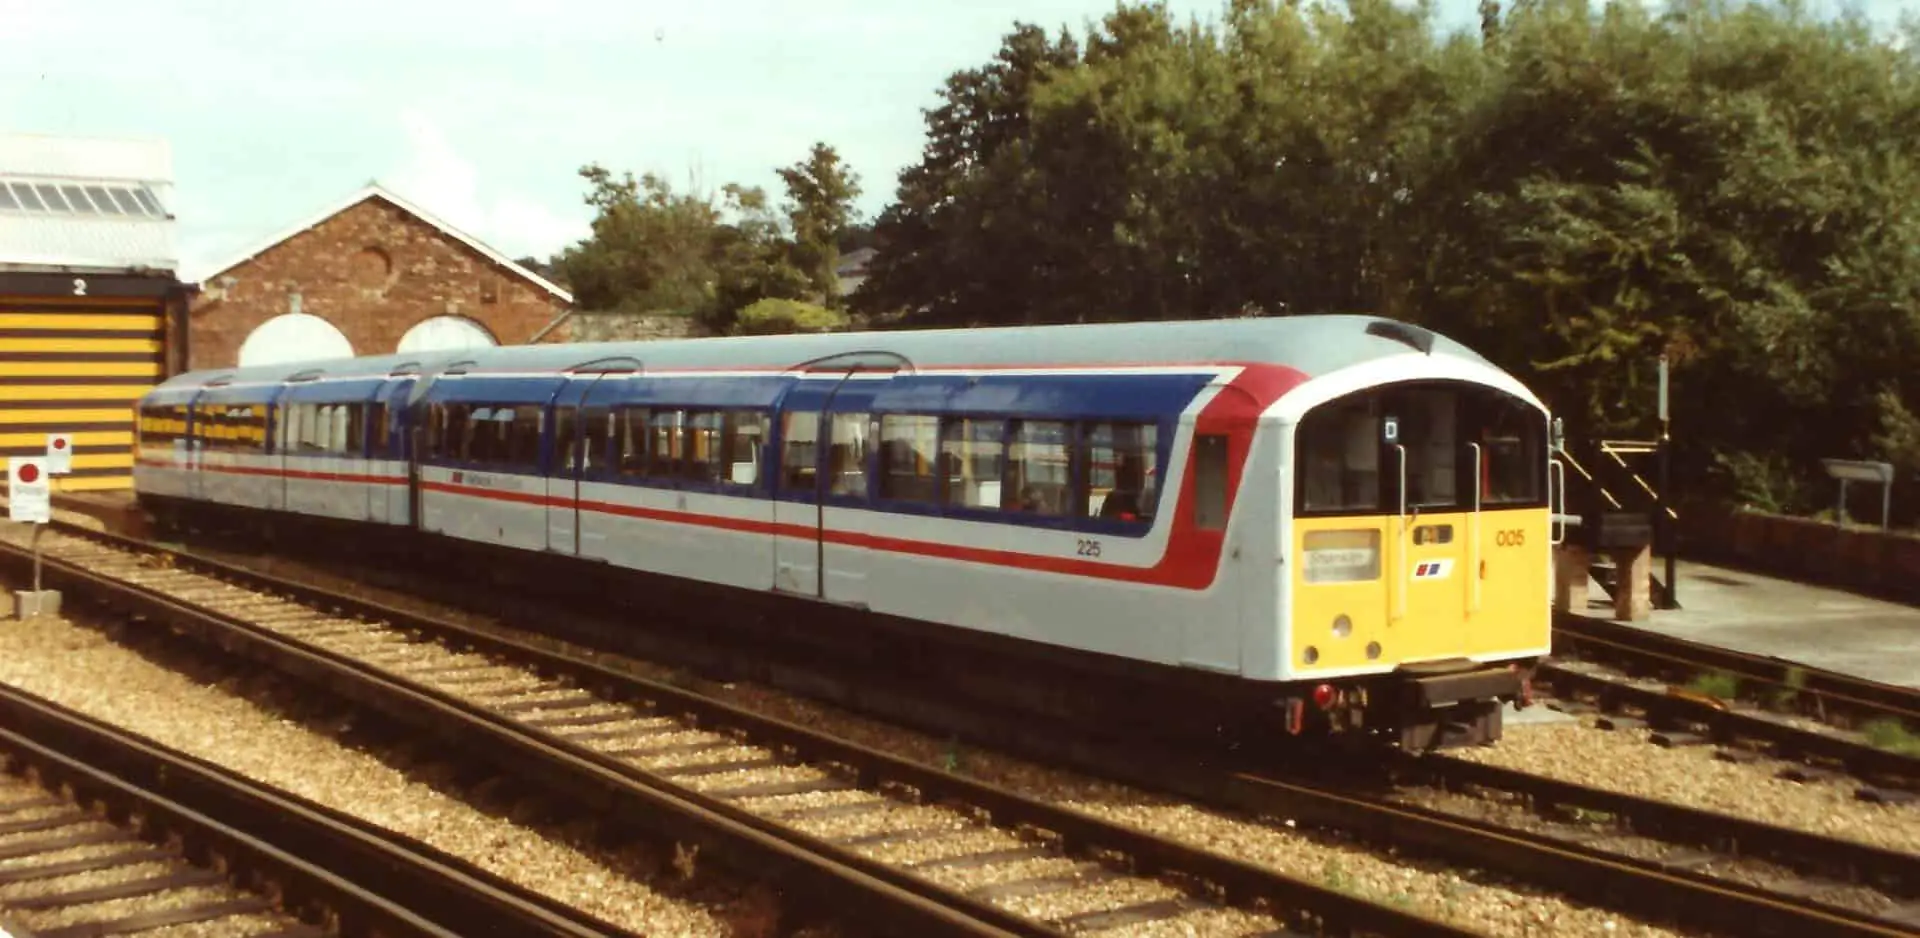 1990s Network South East colours